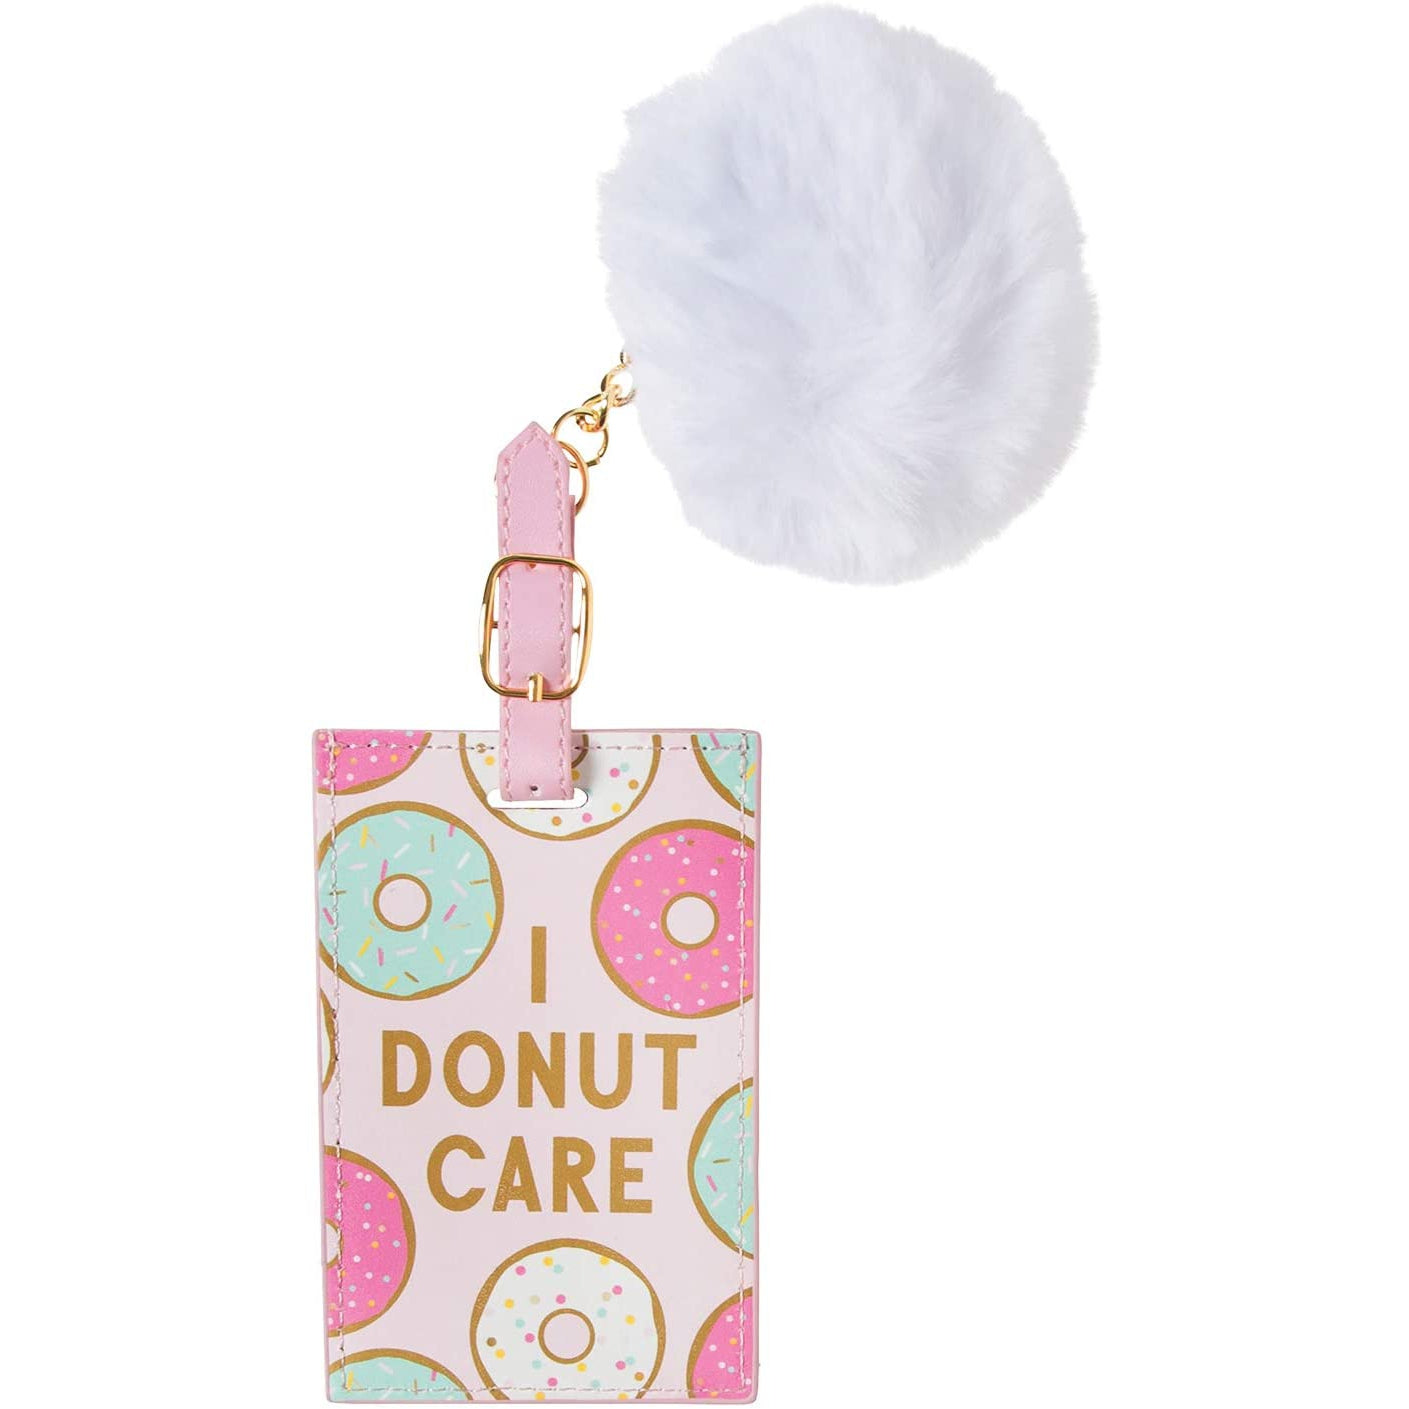 I Donut Care with Pompom Travel Luggage Tag